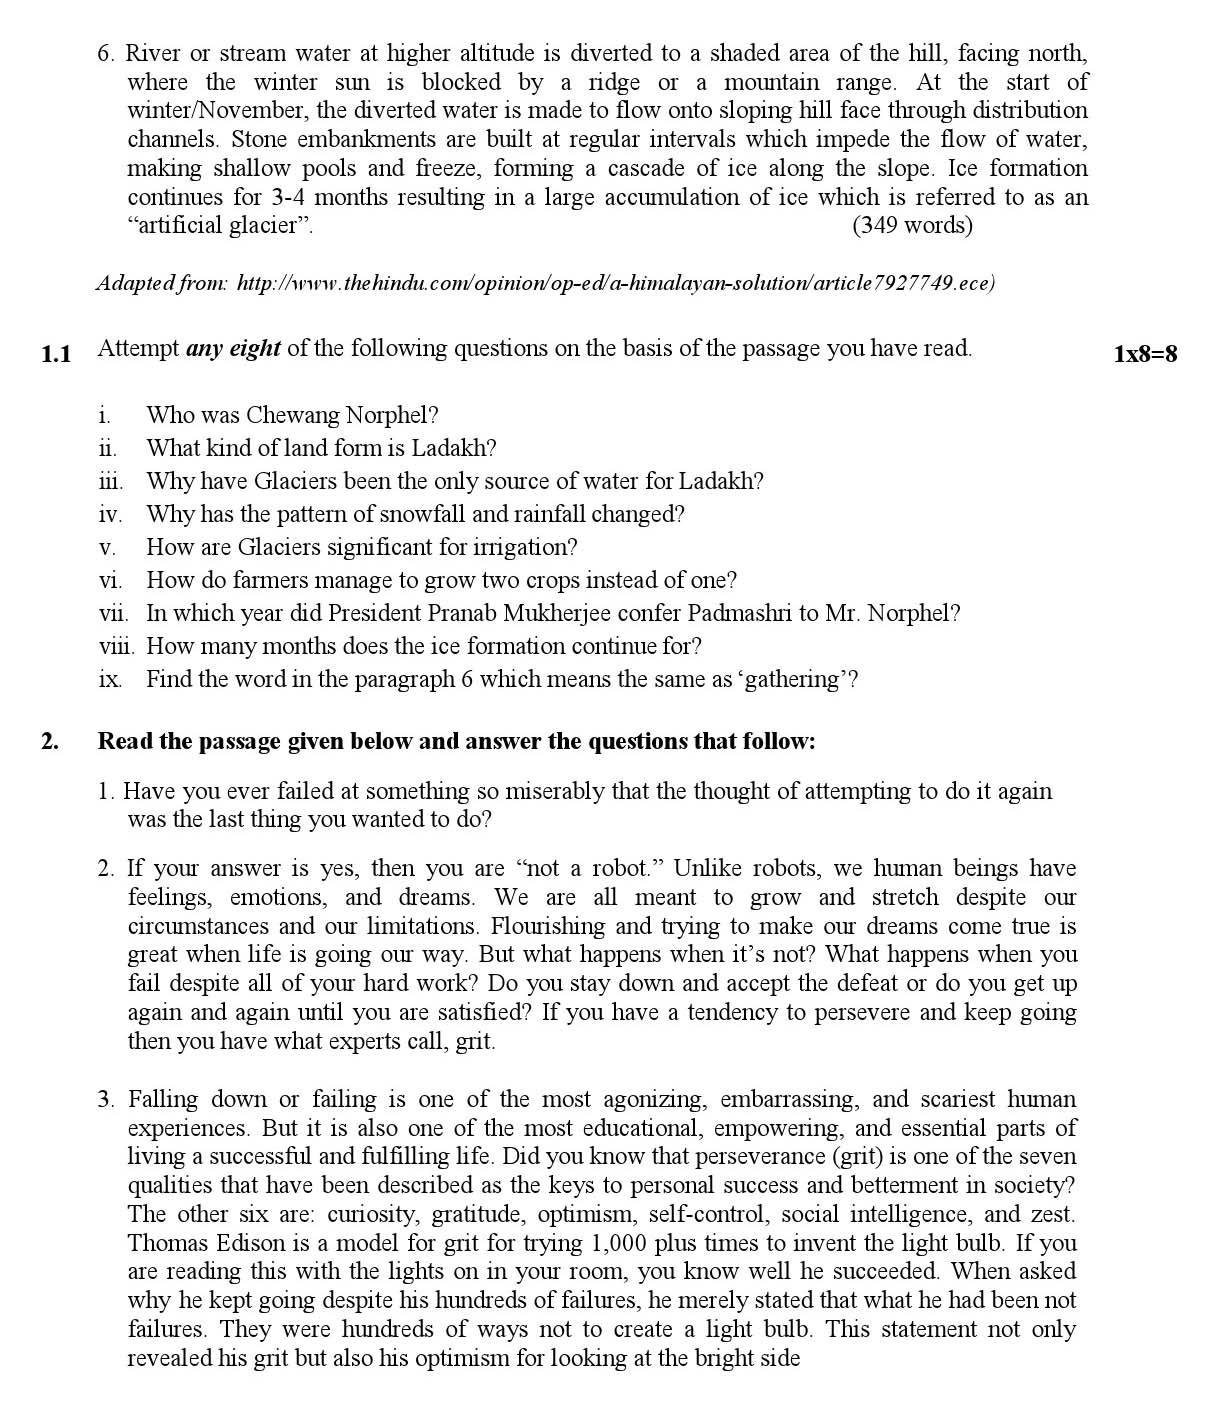 English Language and Literature CBSE Class X Sample Question Paper 2018-19 - Image 2